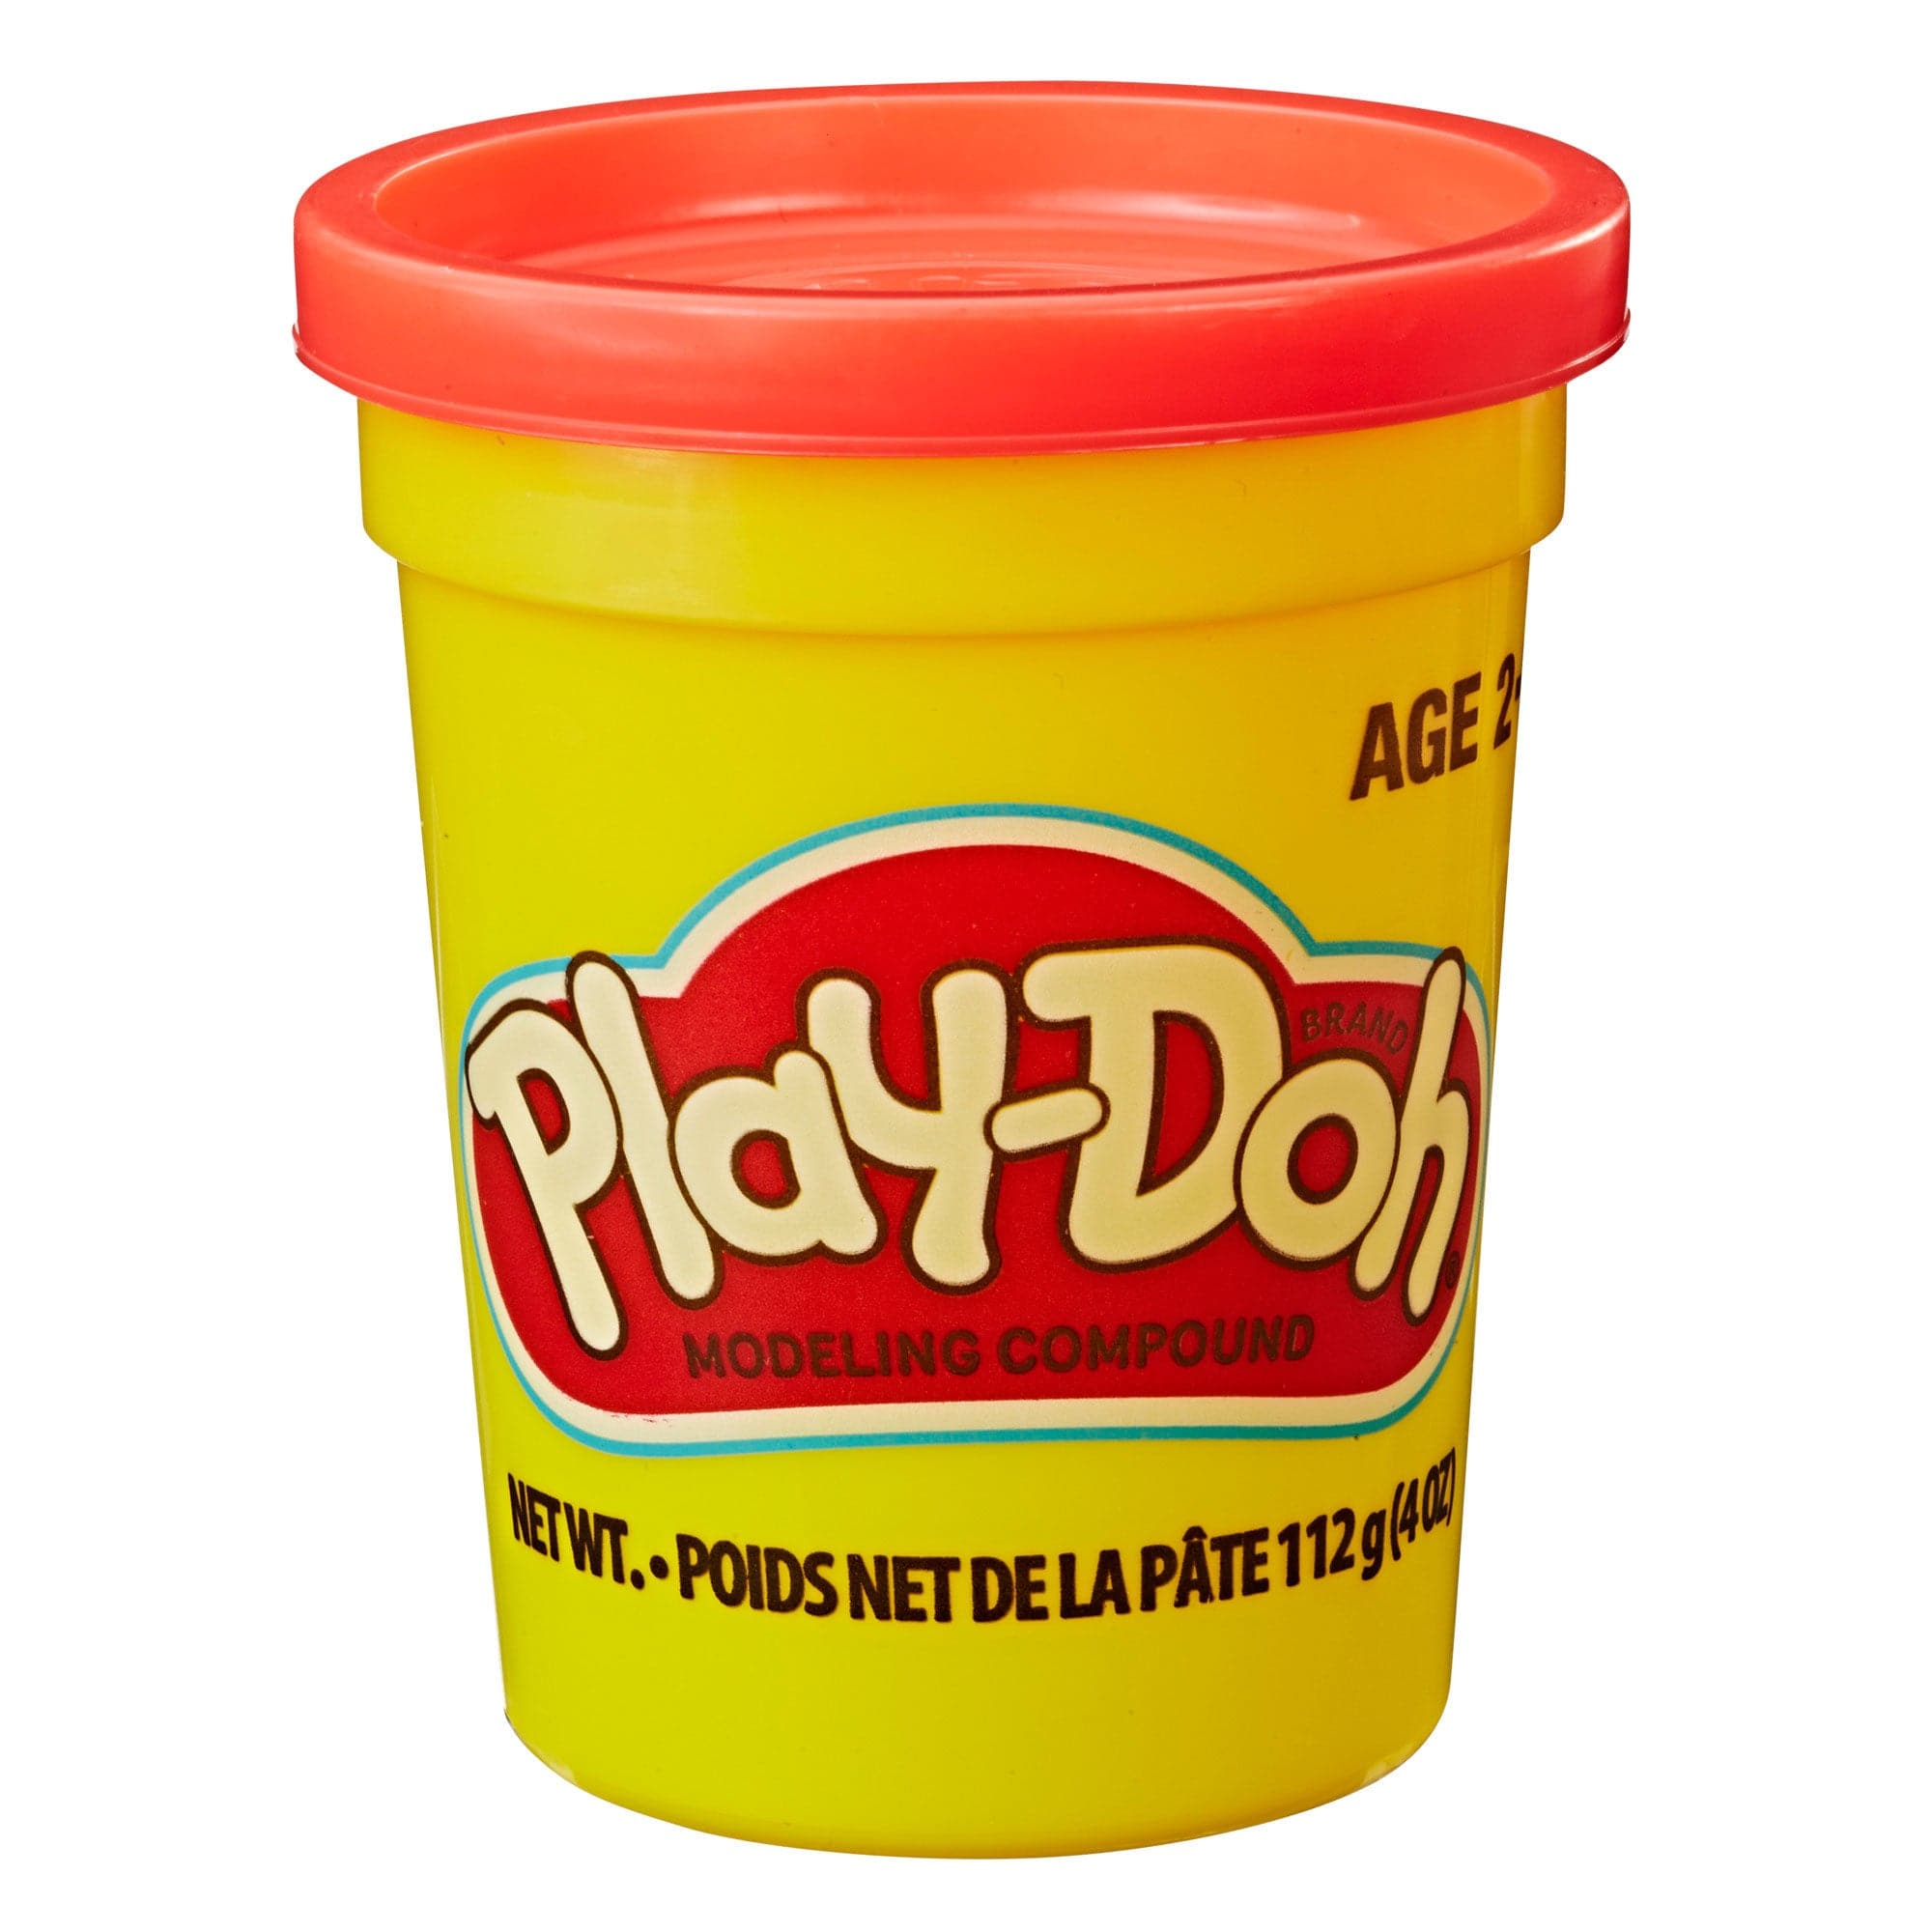 Play-Doh Bulk 12-Pack of Red Non-Toxic Modeling Compound, 4oz Cans